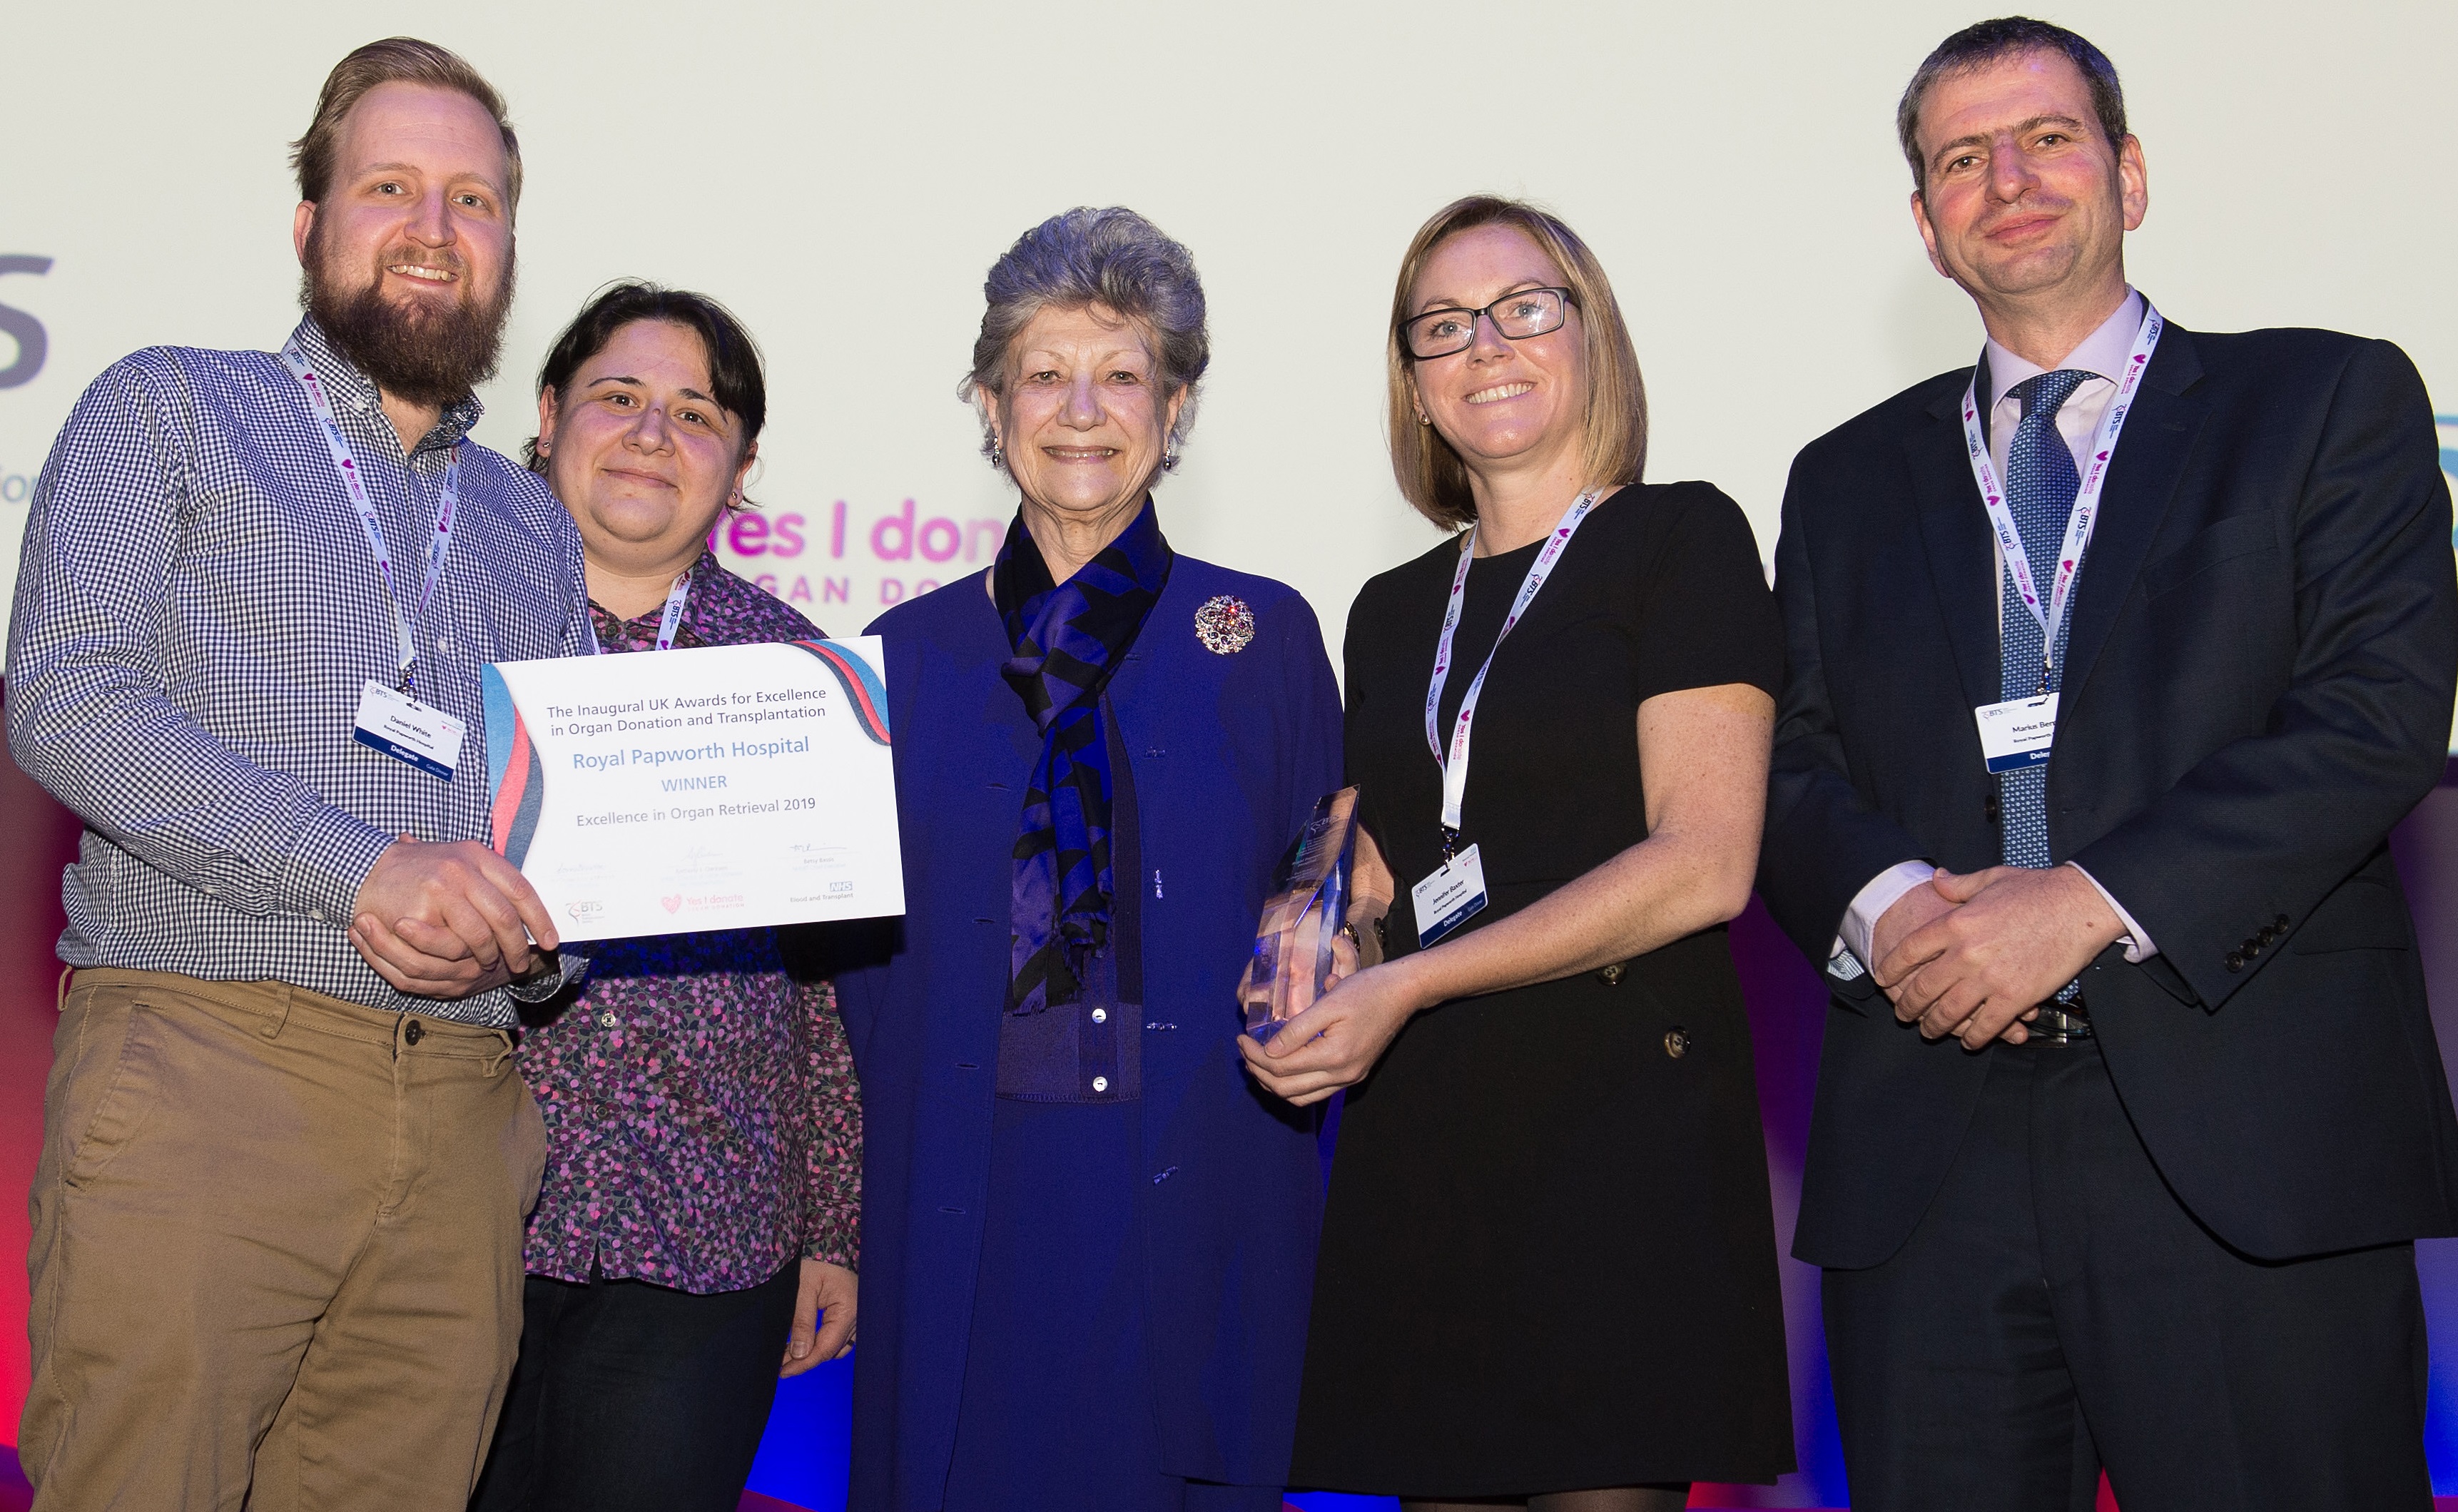 Staff from The Royal Papworth Hospital receiving the award for Excellence in Organ Retrieval